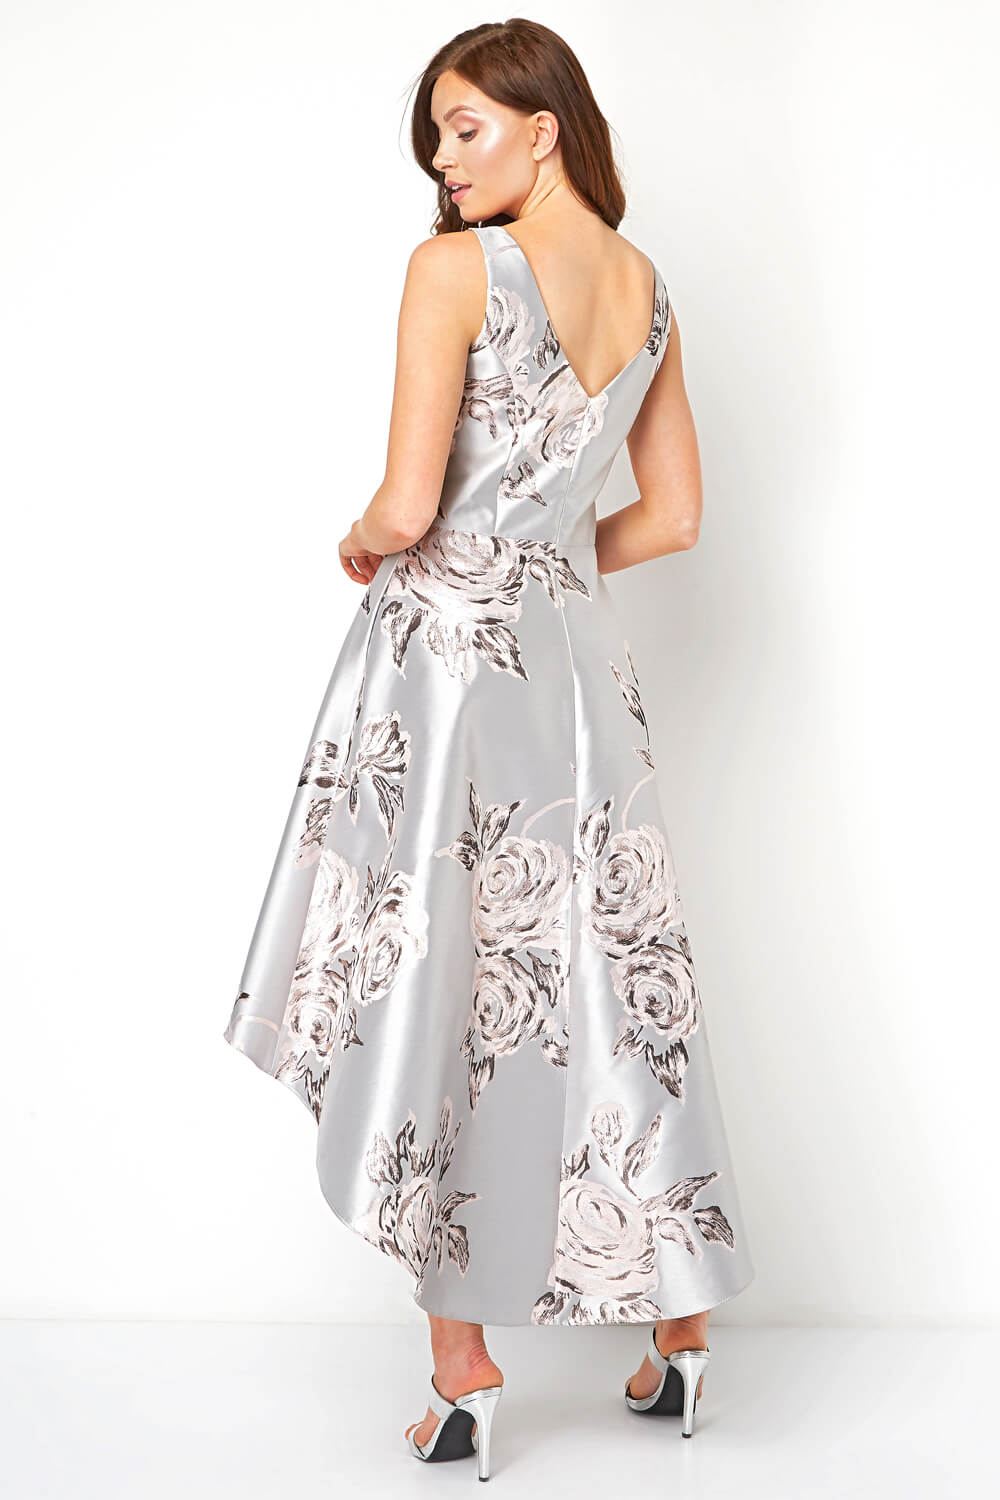 Silver Jacquard Rose Gown Dress, Image 3 of 5